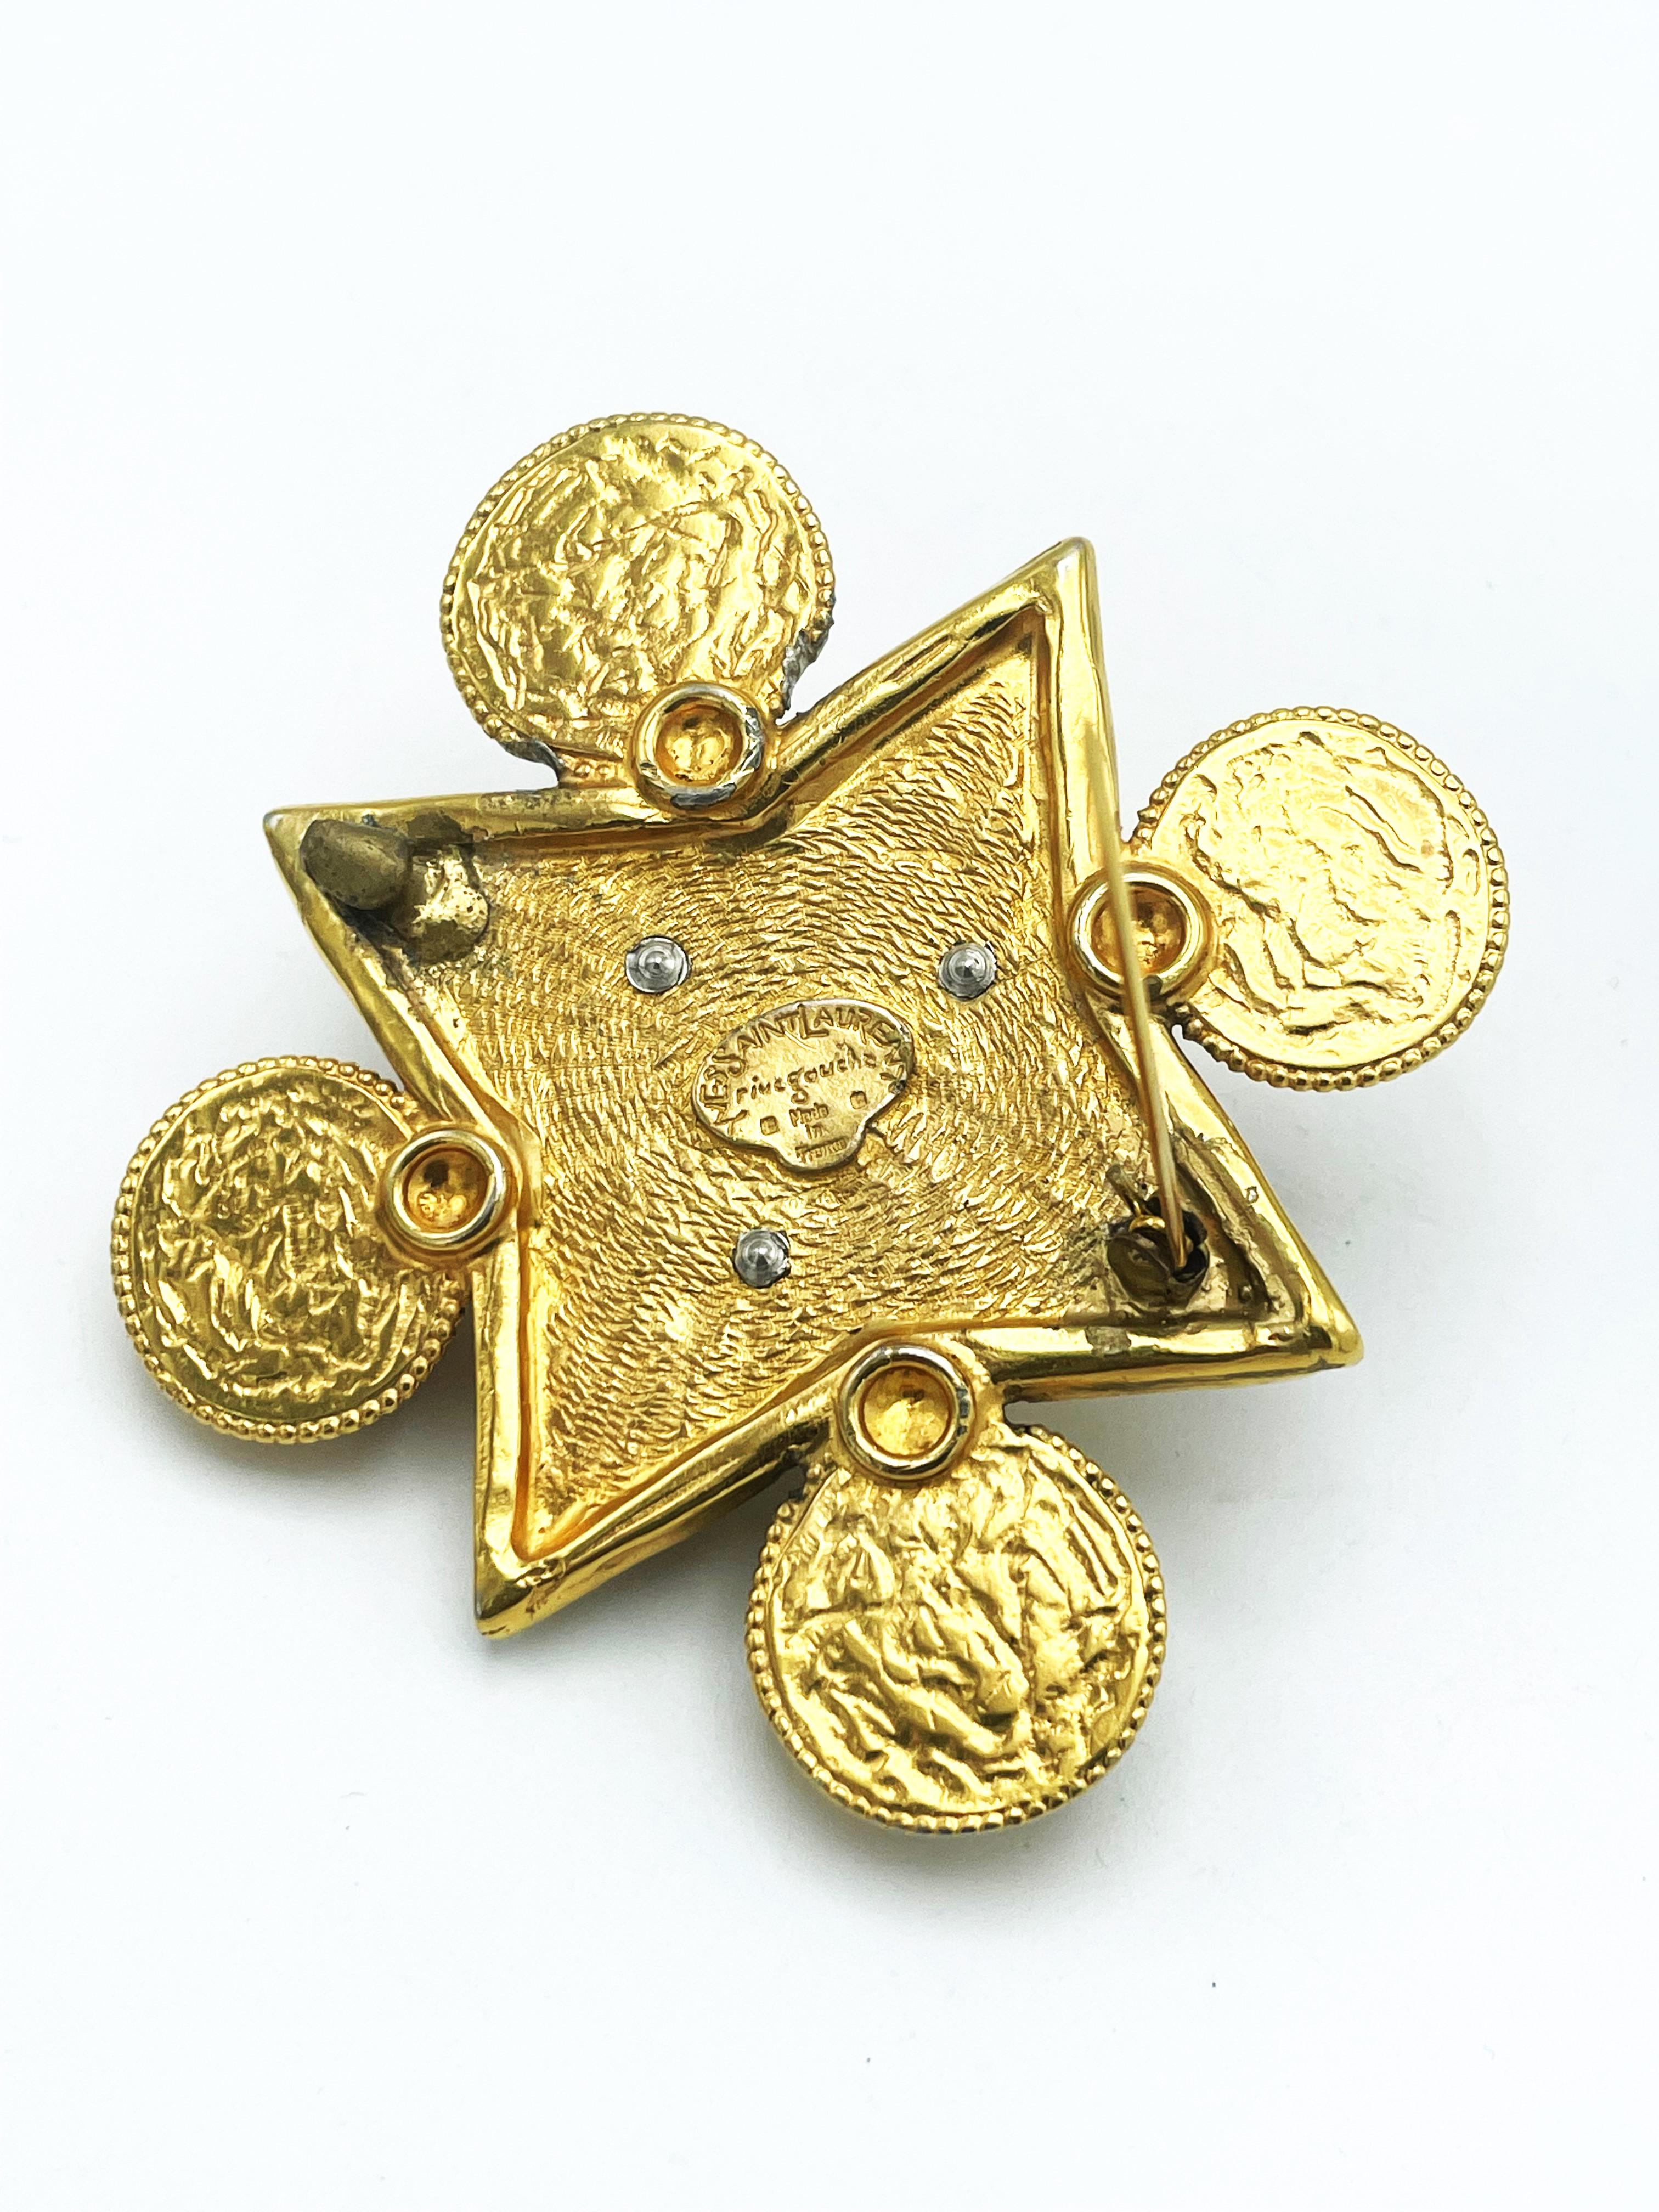 R.Goossens for YSL Paris, Rive gauch, brooch in the shape of a cross, gilt metal For Sale 2